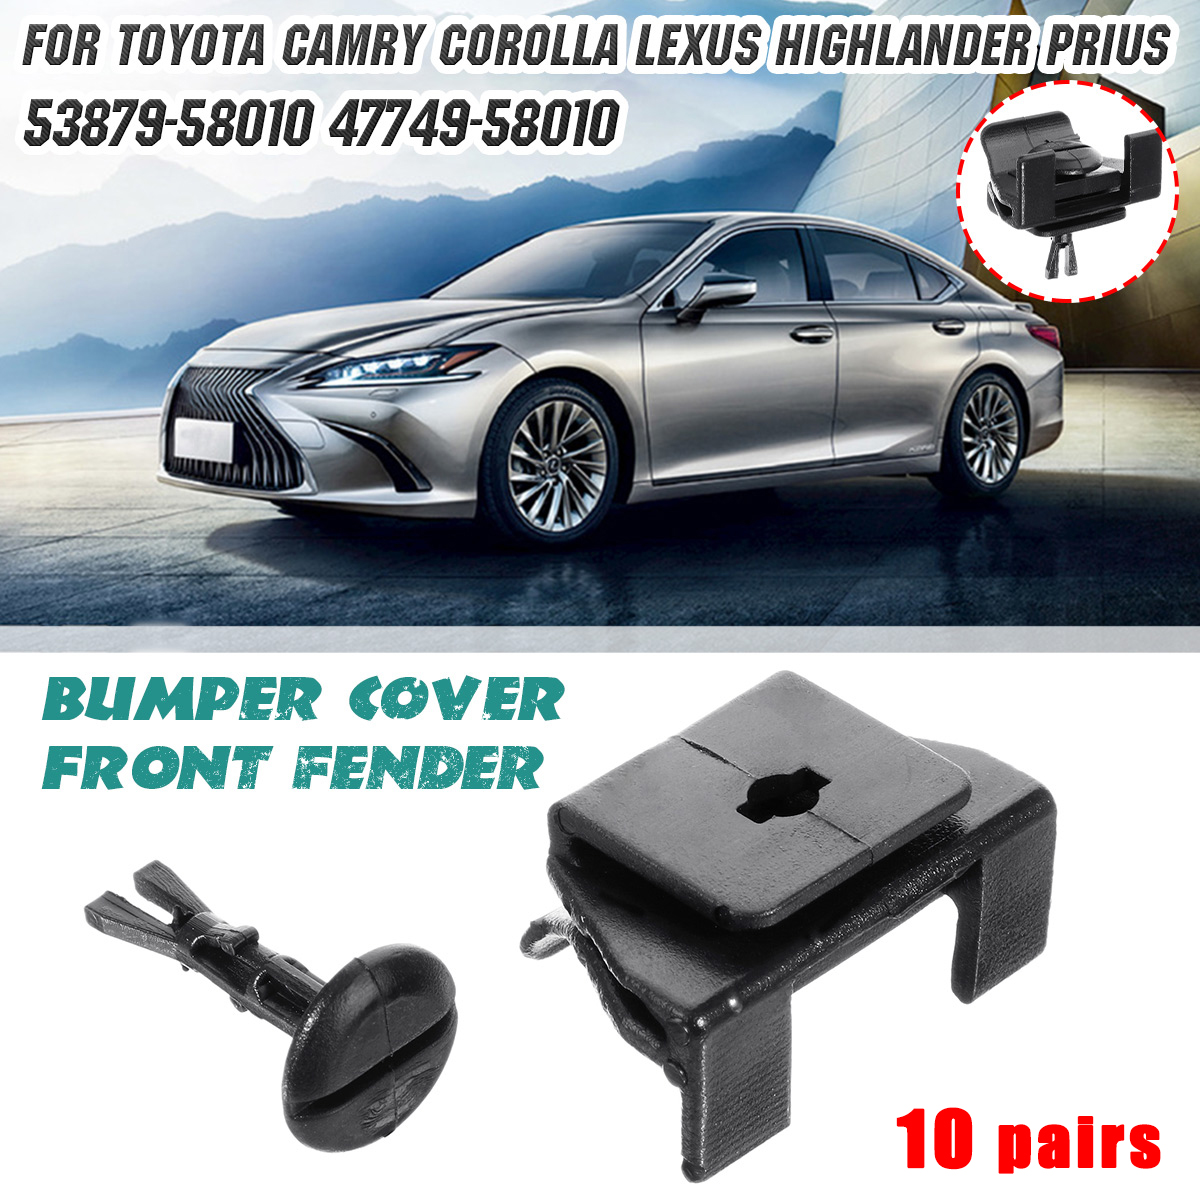 10 Sets Front Fender Bumper Cover Clip & Pin Kits For Toyota Camry Corolla Lexus